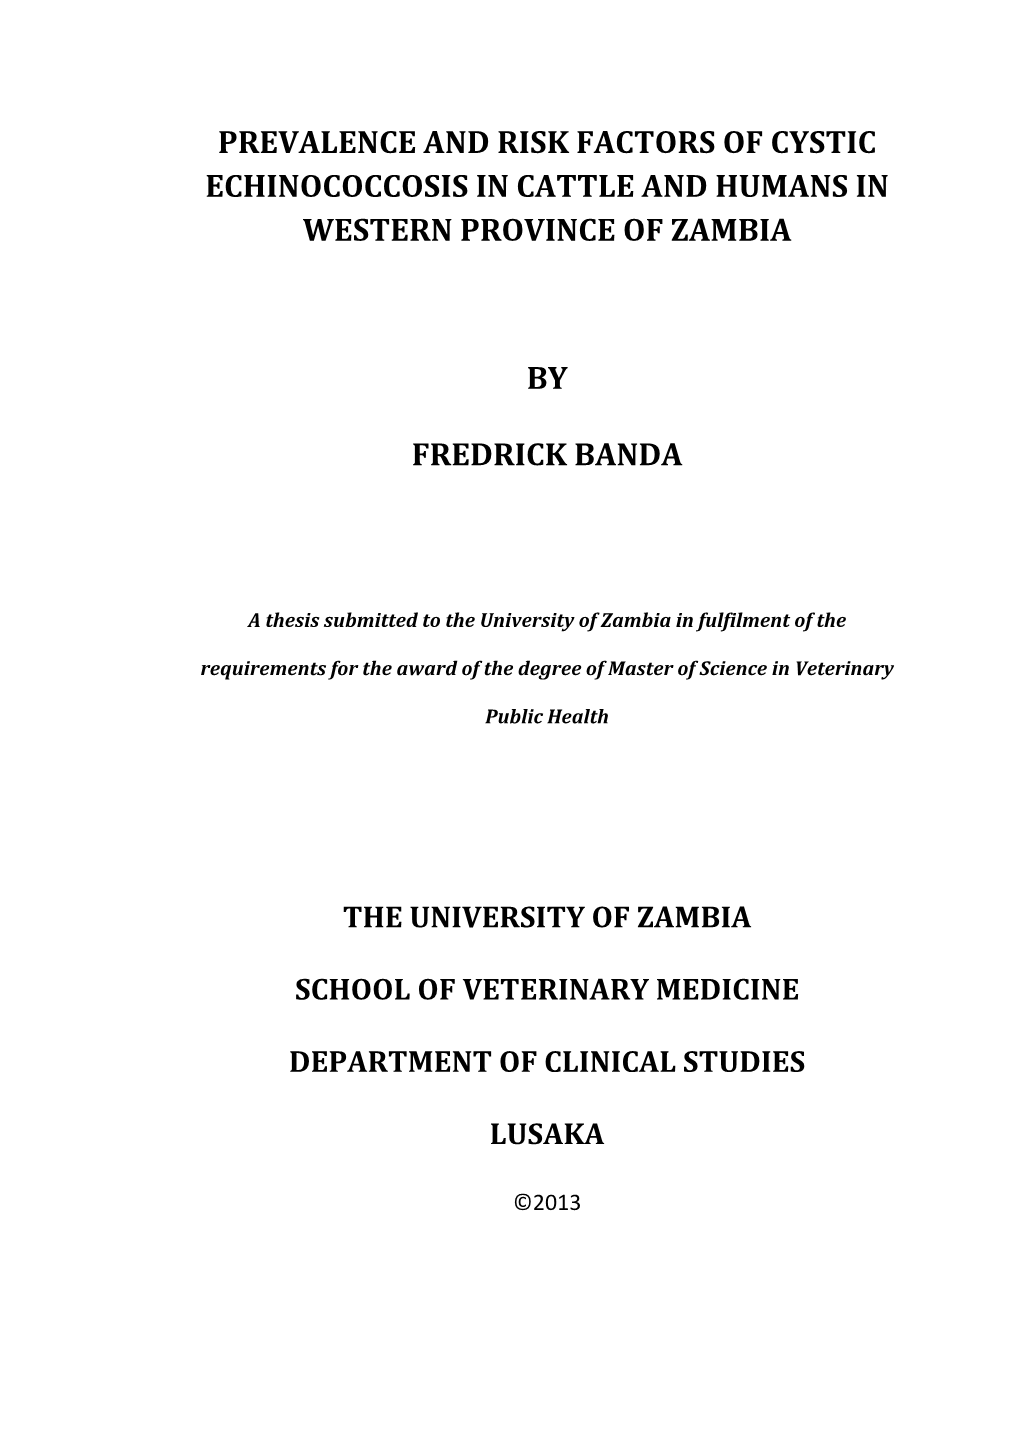 Prevalence and Risk Factors of Cystic Echinococcosis in Cattle and Humans in Western Province of Zambia